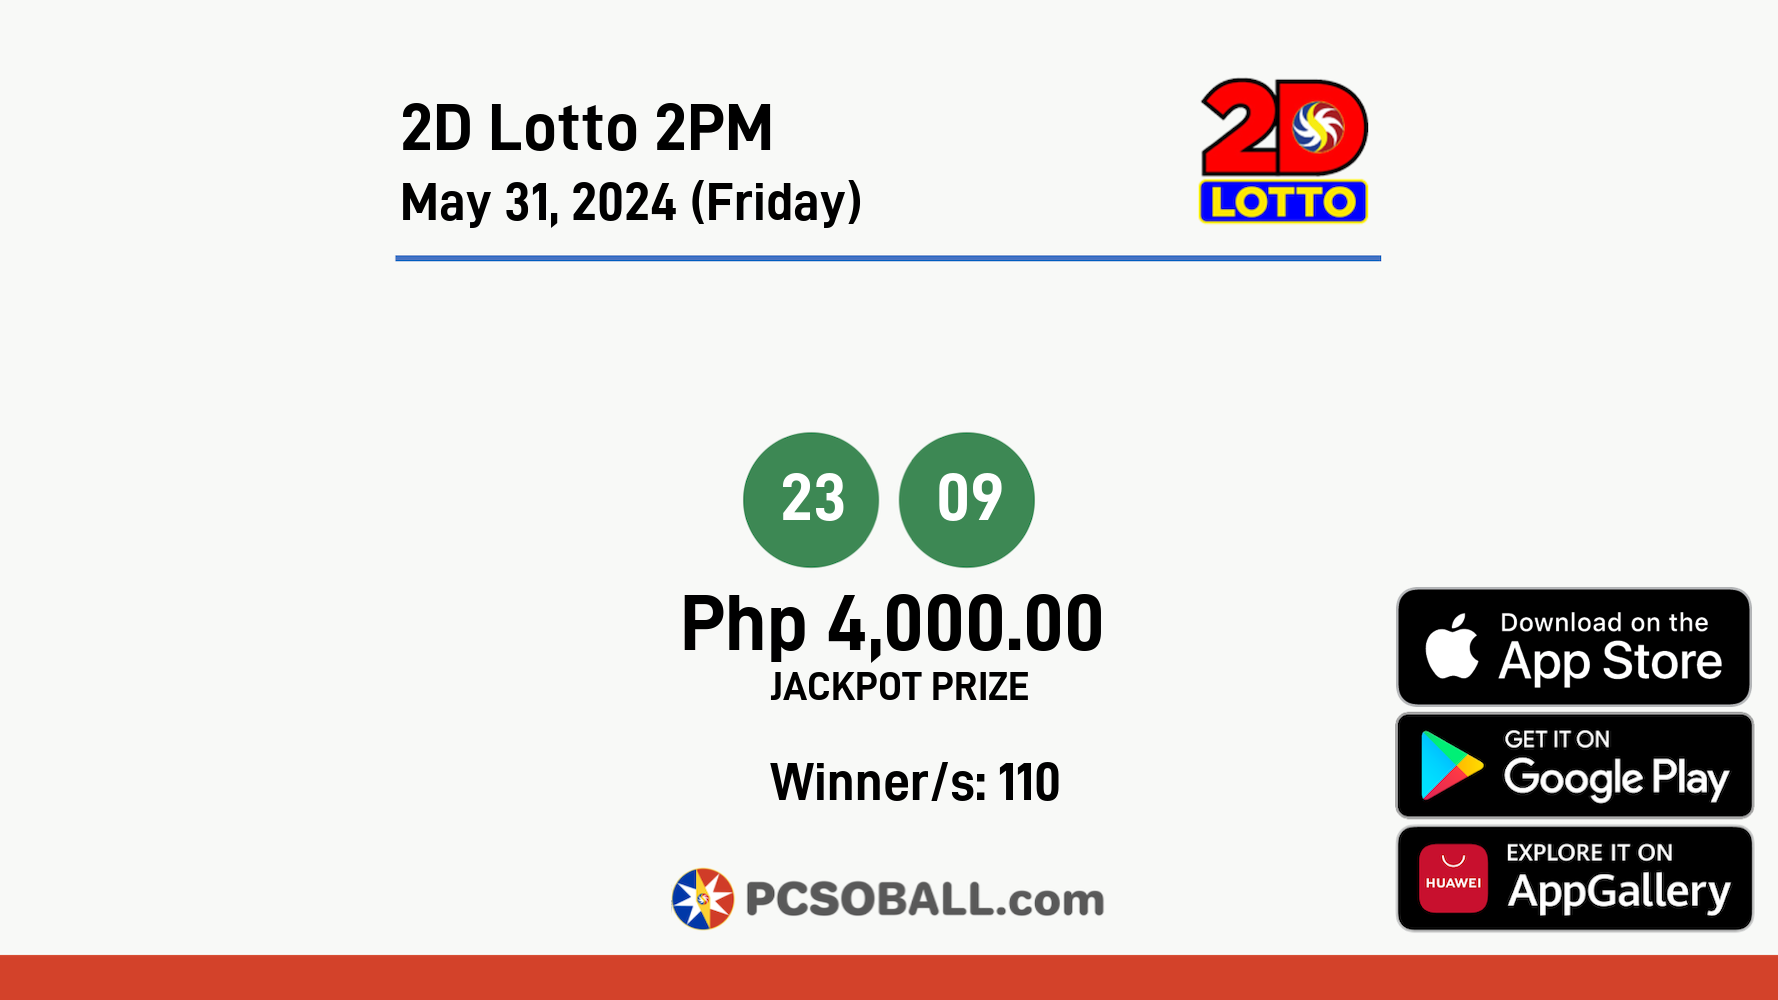 2D Lotto 2PM May 31, 2024 (Friday) Result